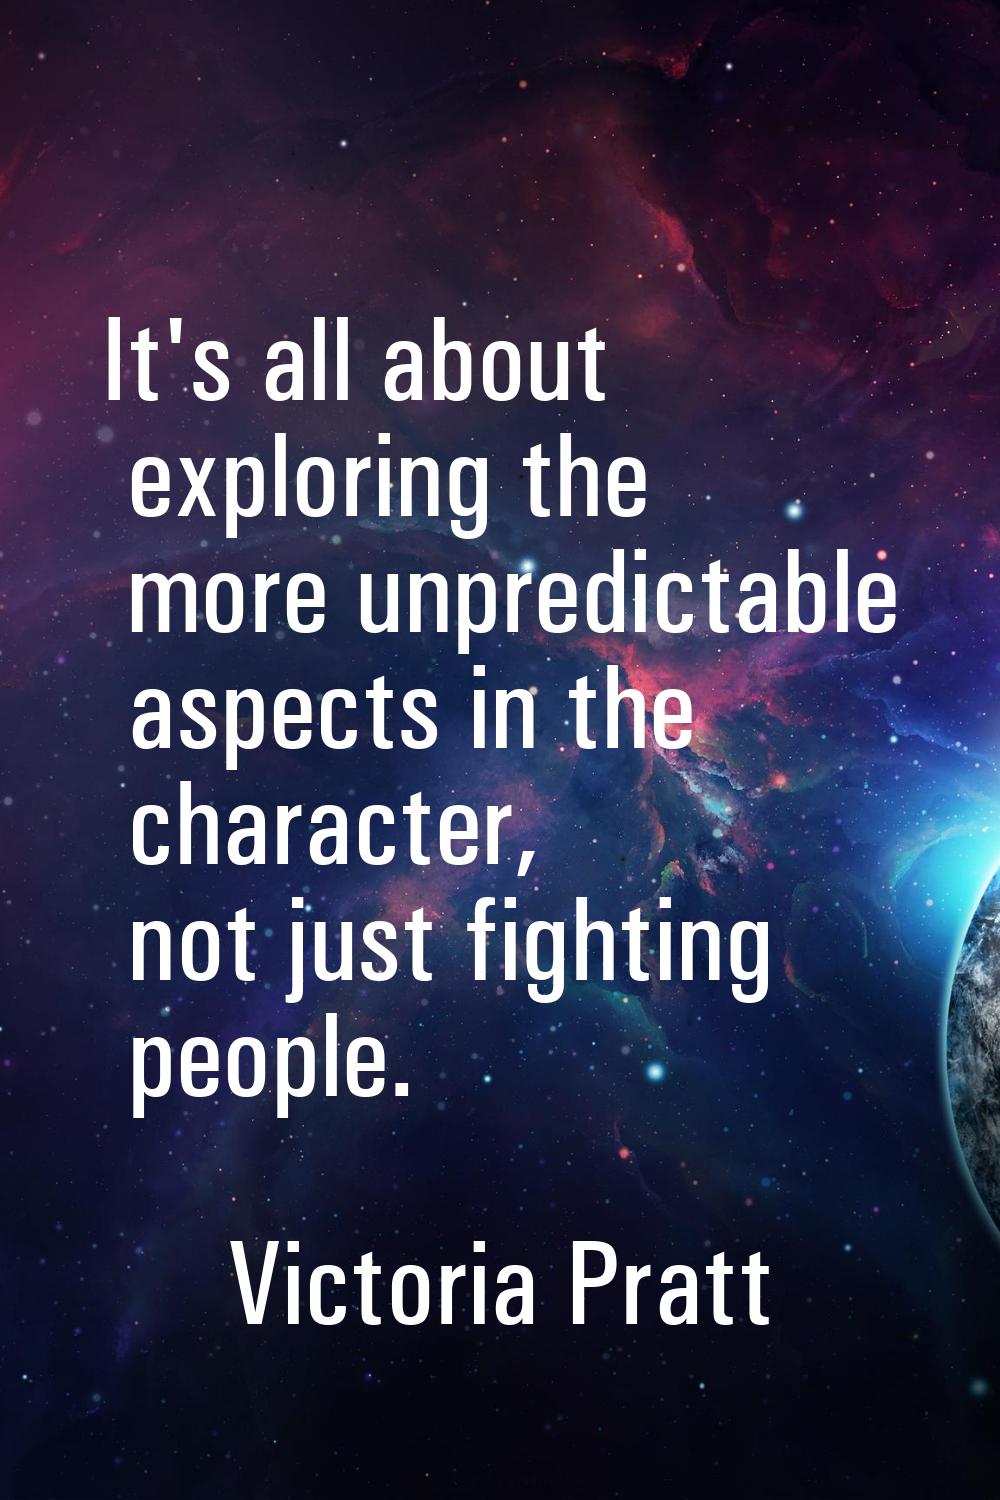 It's all about exploring the more unpredictable aspects in the character, not just fighting people.